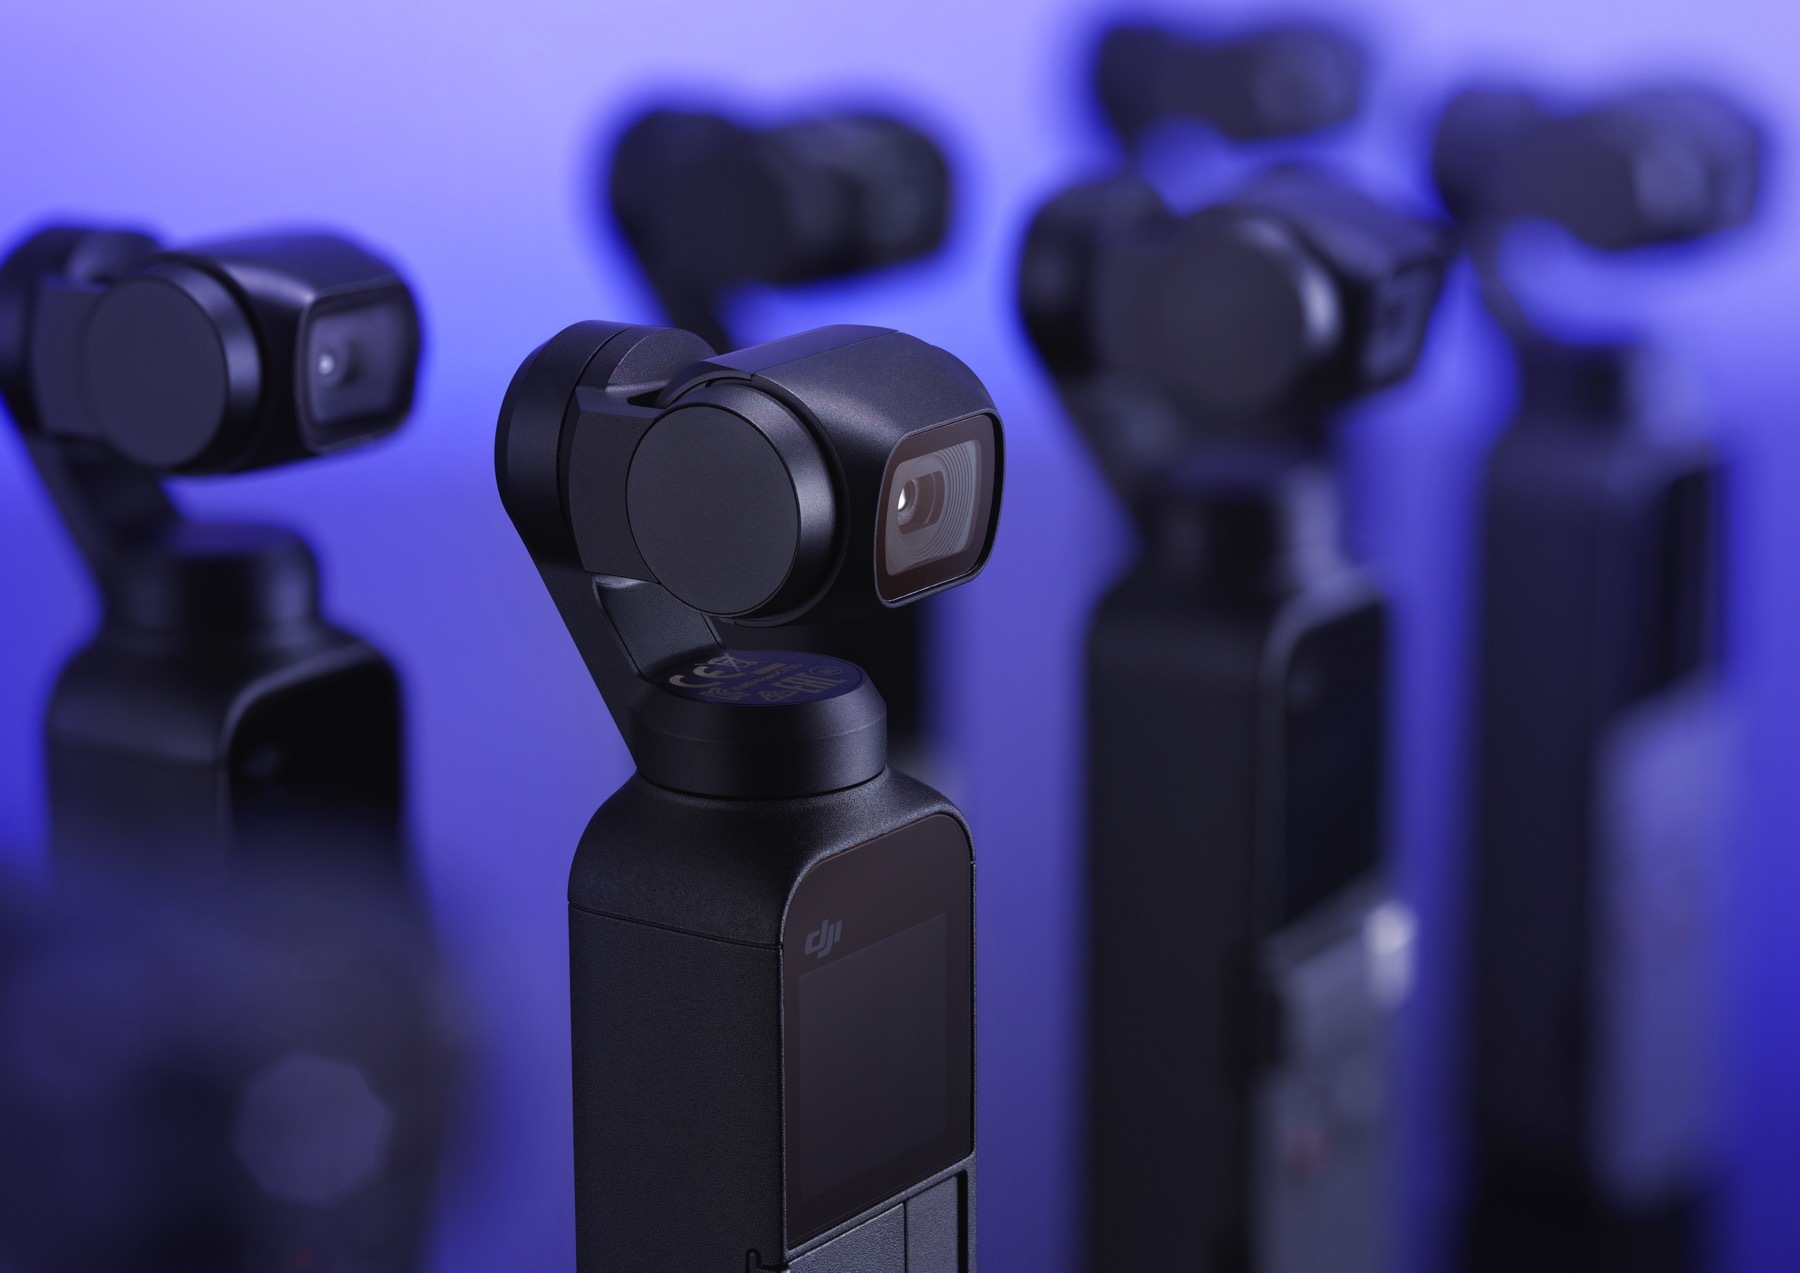 DJI's stabilized Osmo Pocket camera launches next month for $349 | TechSpot